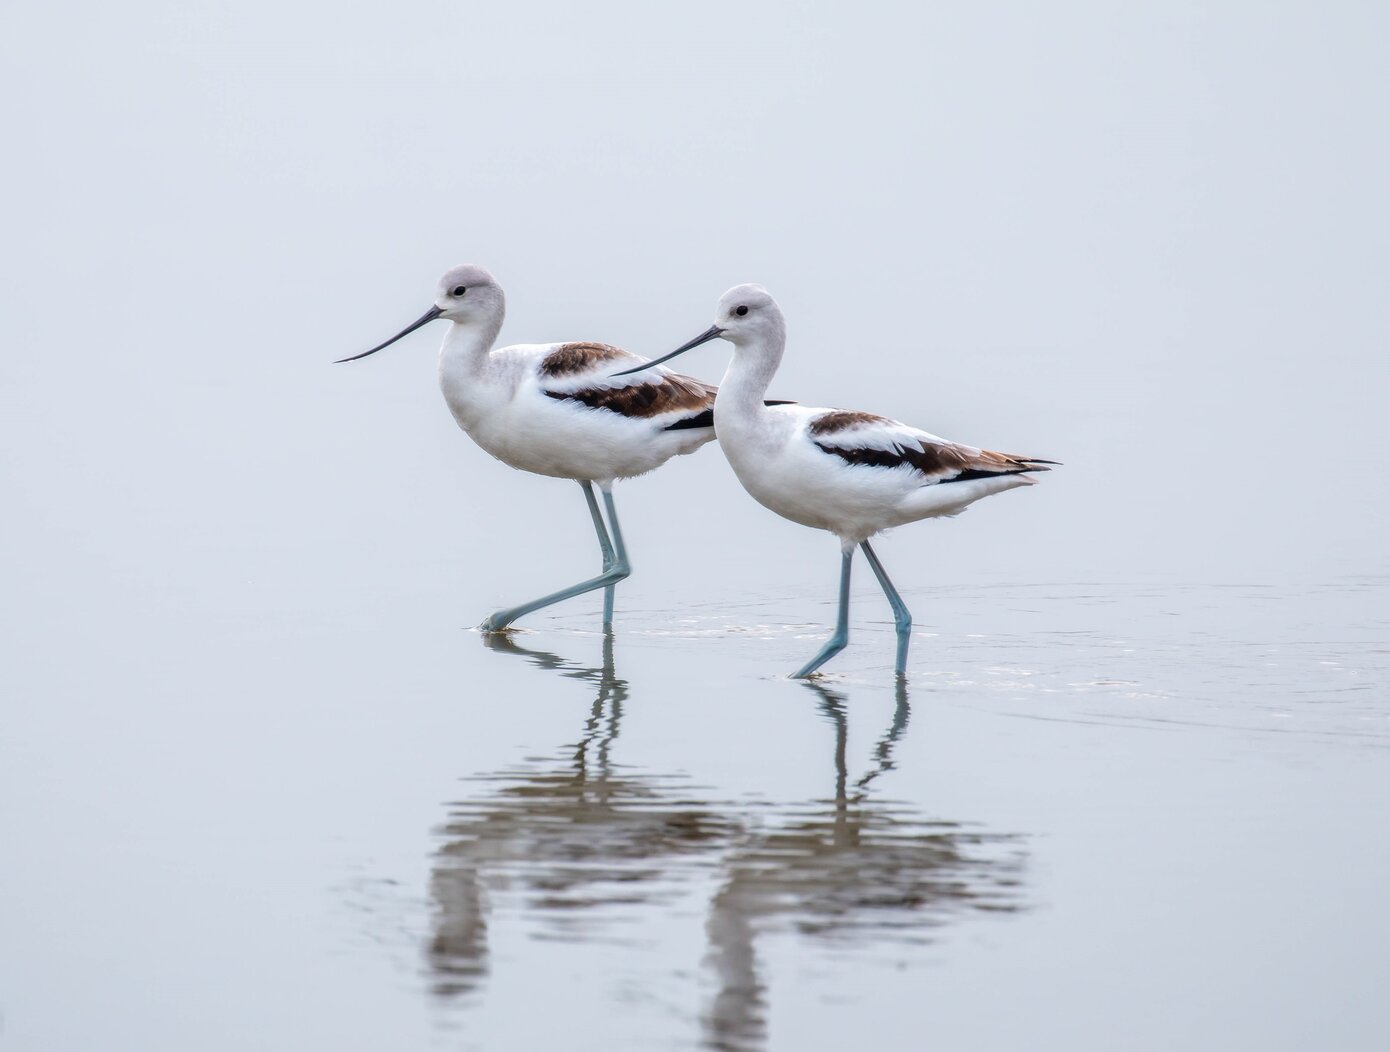 American Avocets were unusual visitors at Miller Field. Photo: Lawrence Pugliares